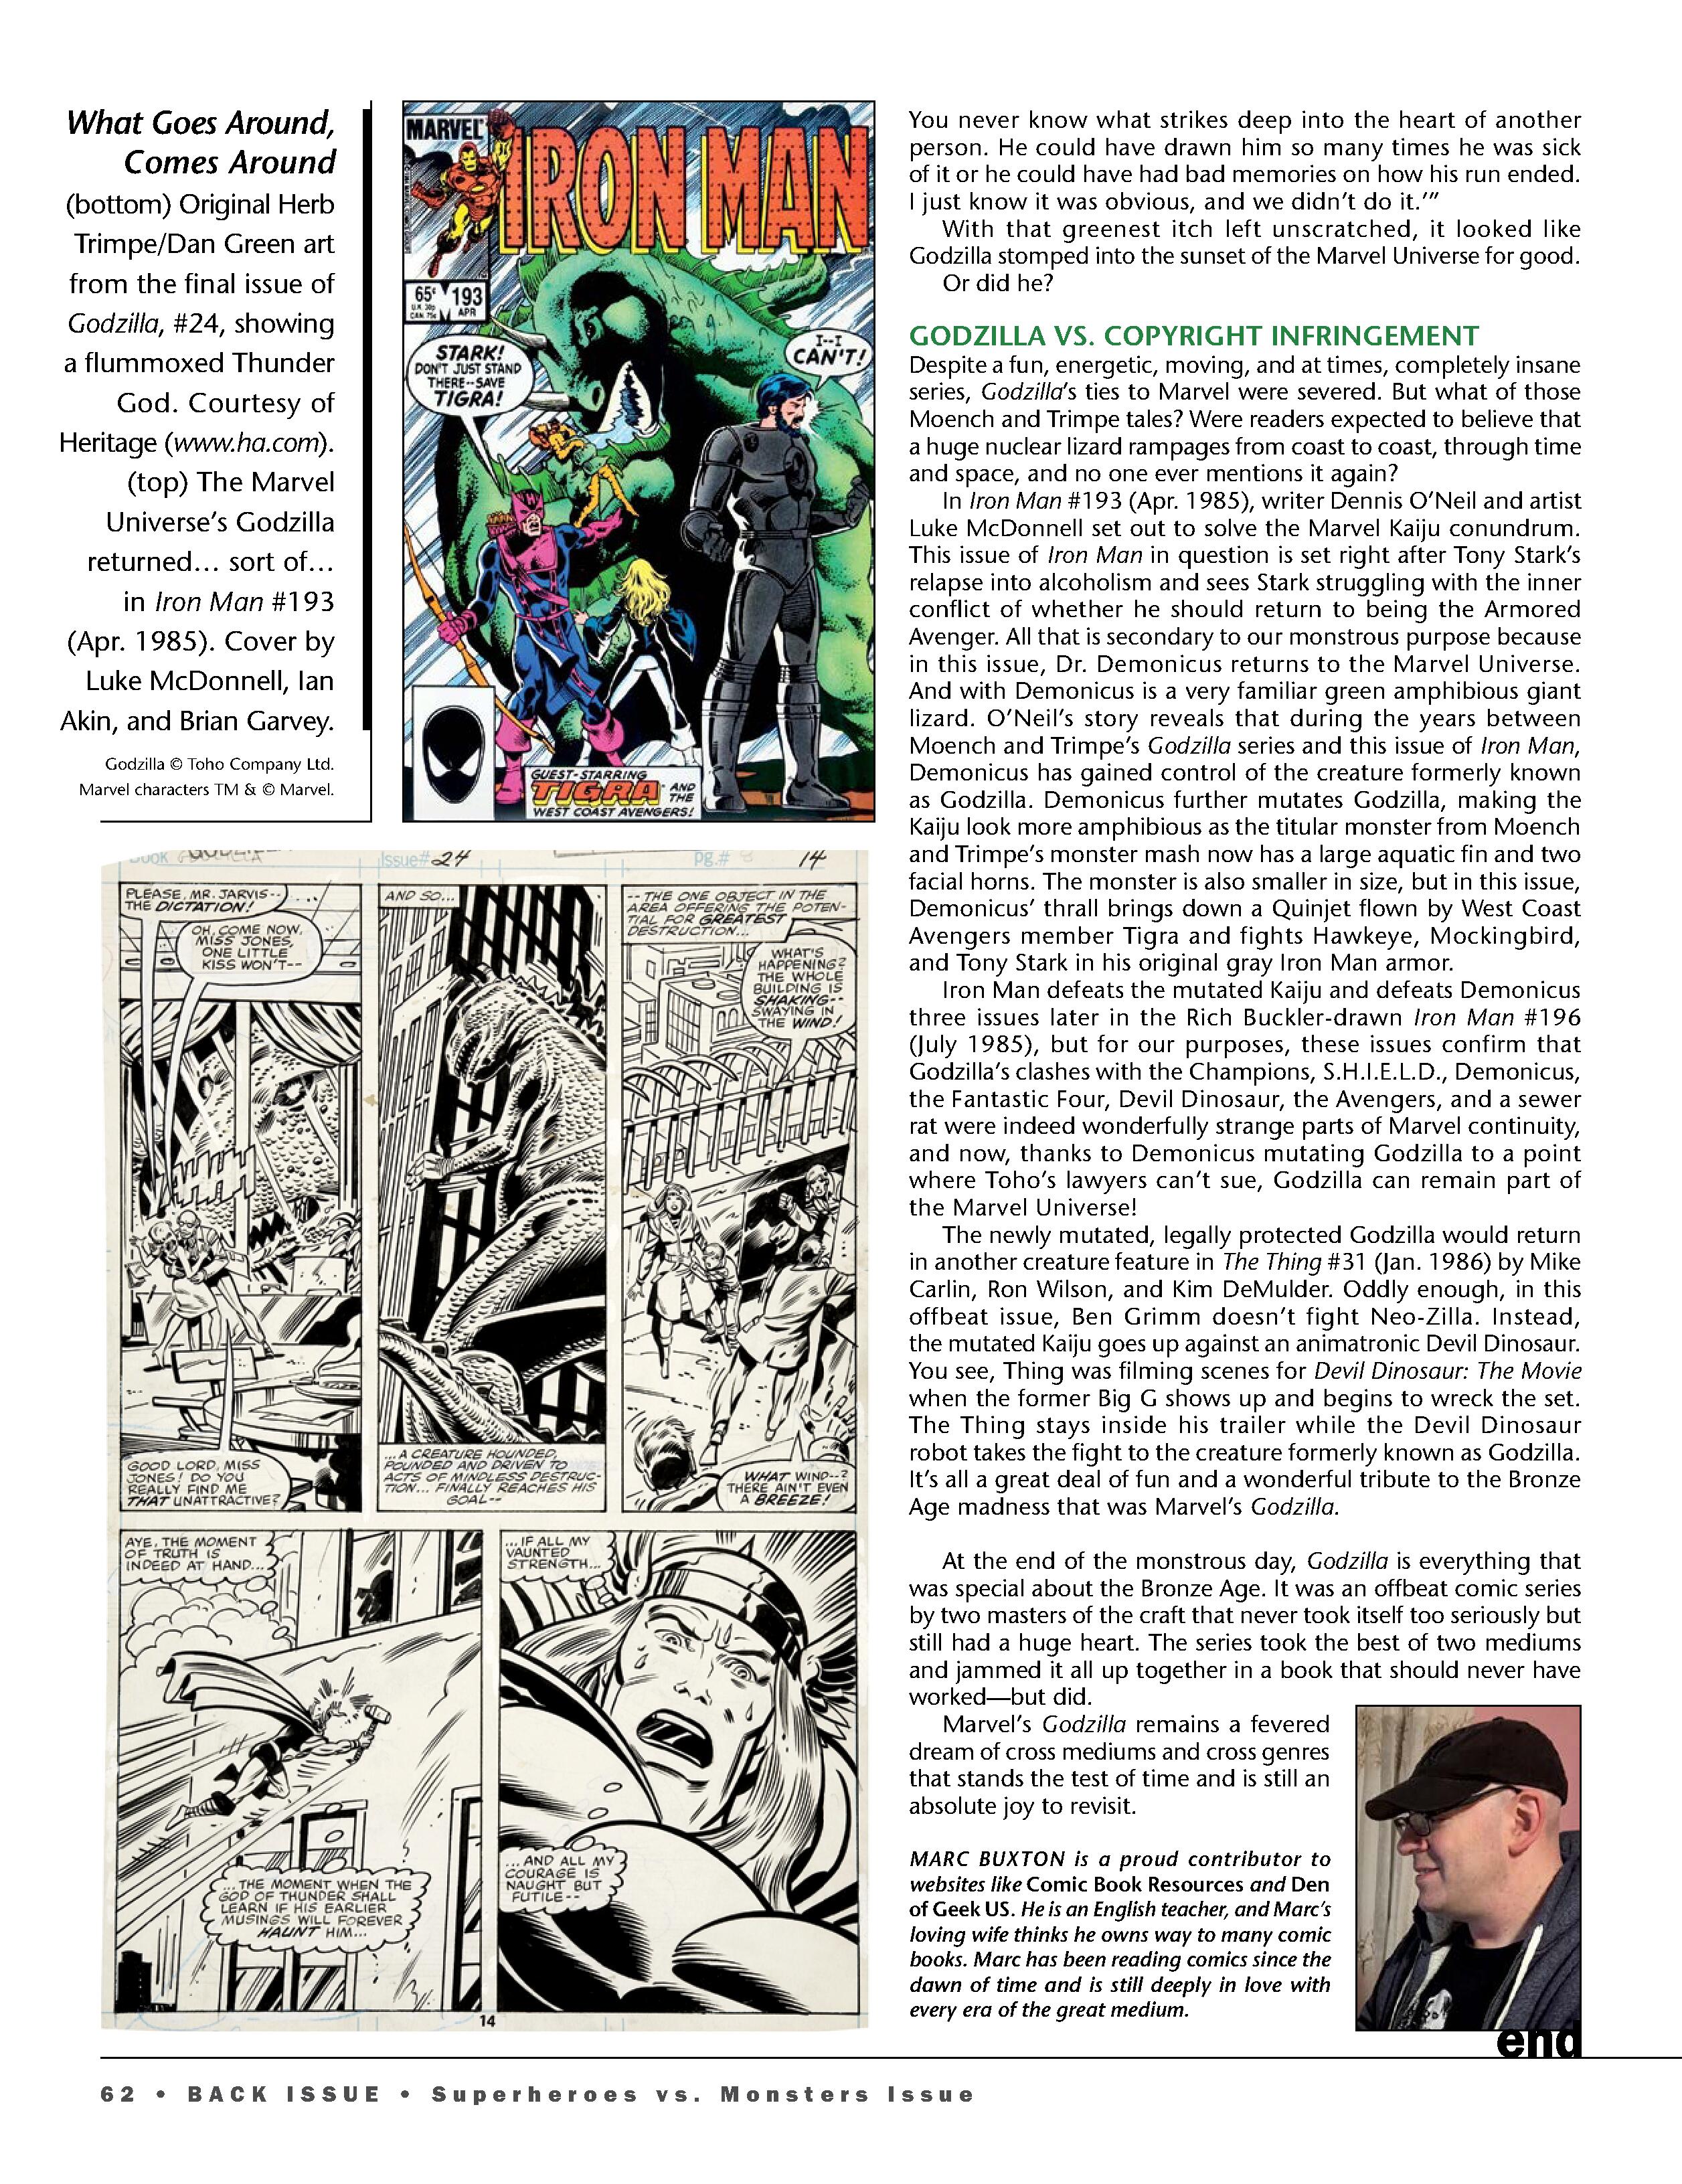 Read online Back Issue comic -  Issue #116 - 64